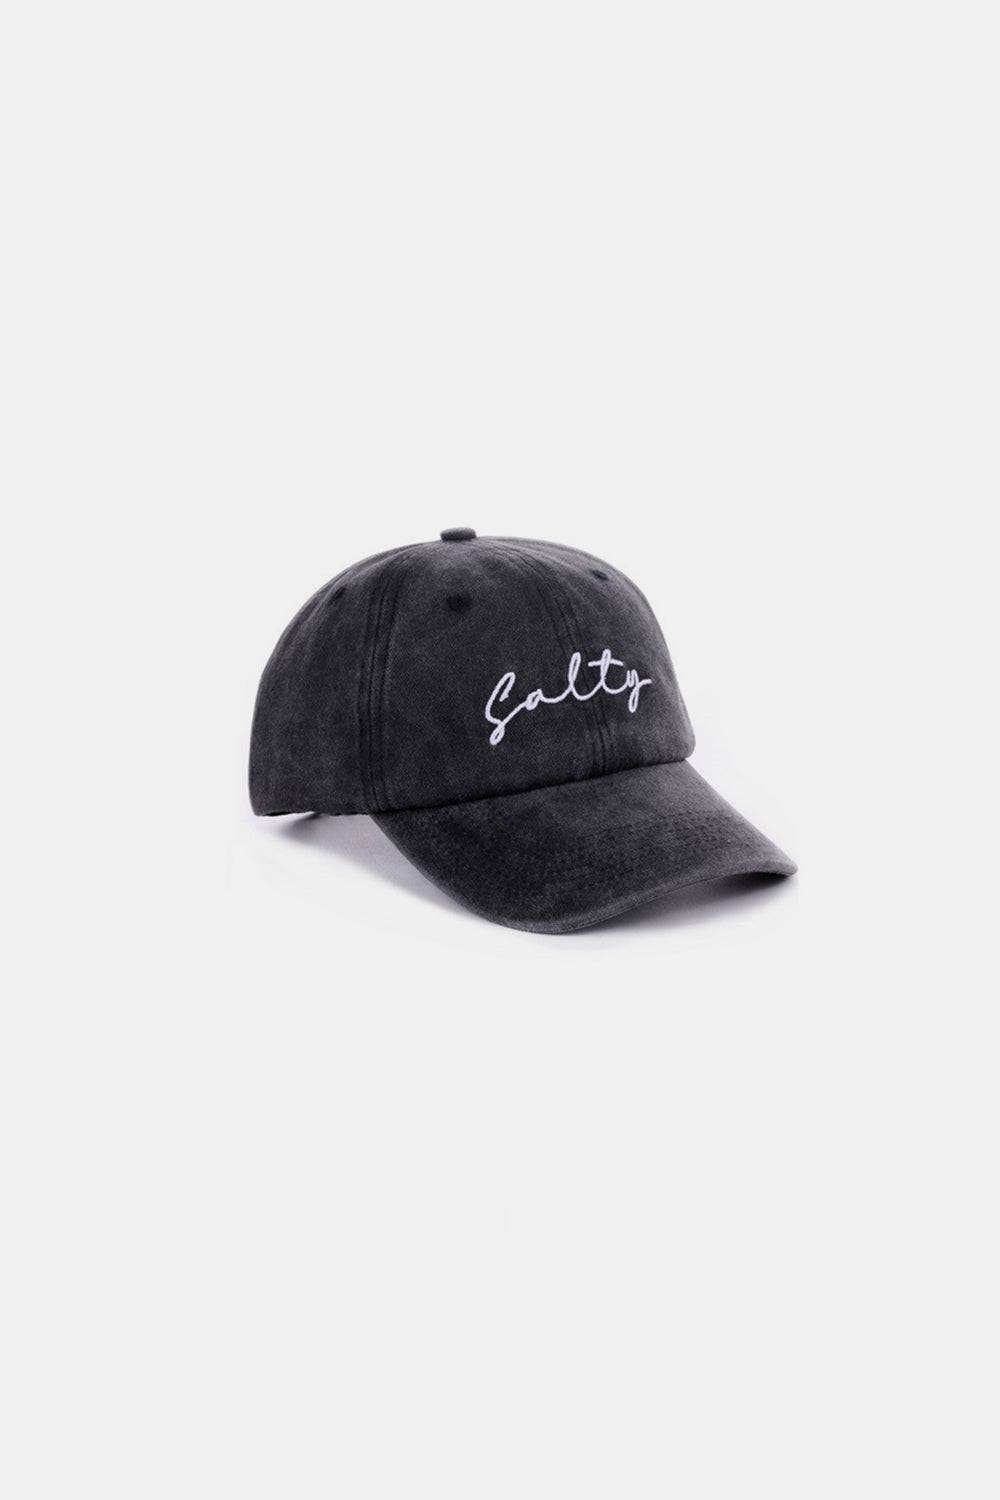 a black hat with the word glitter written on it